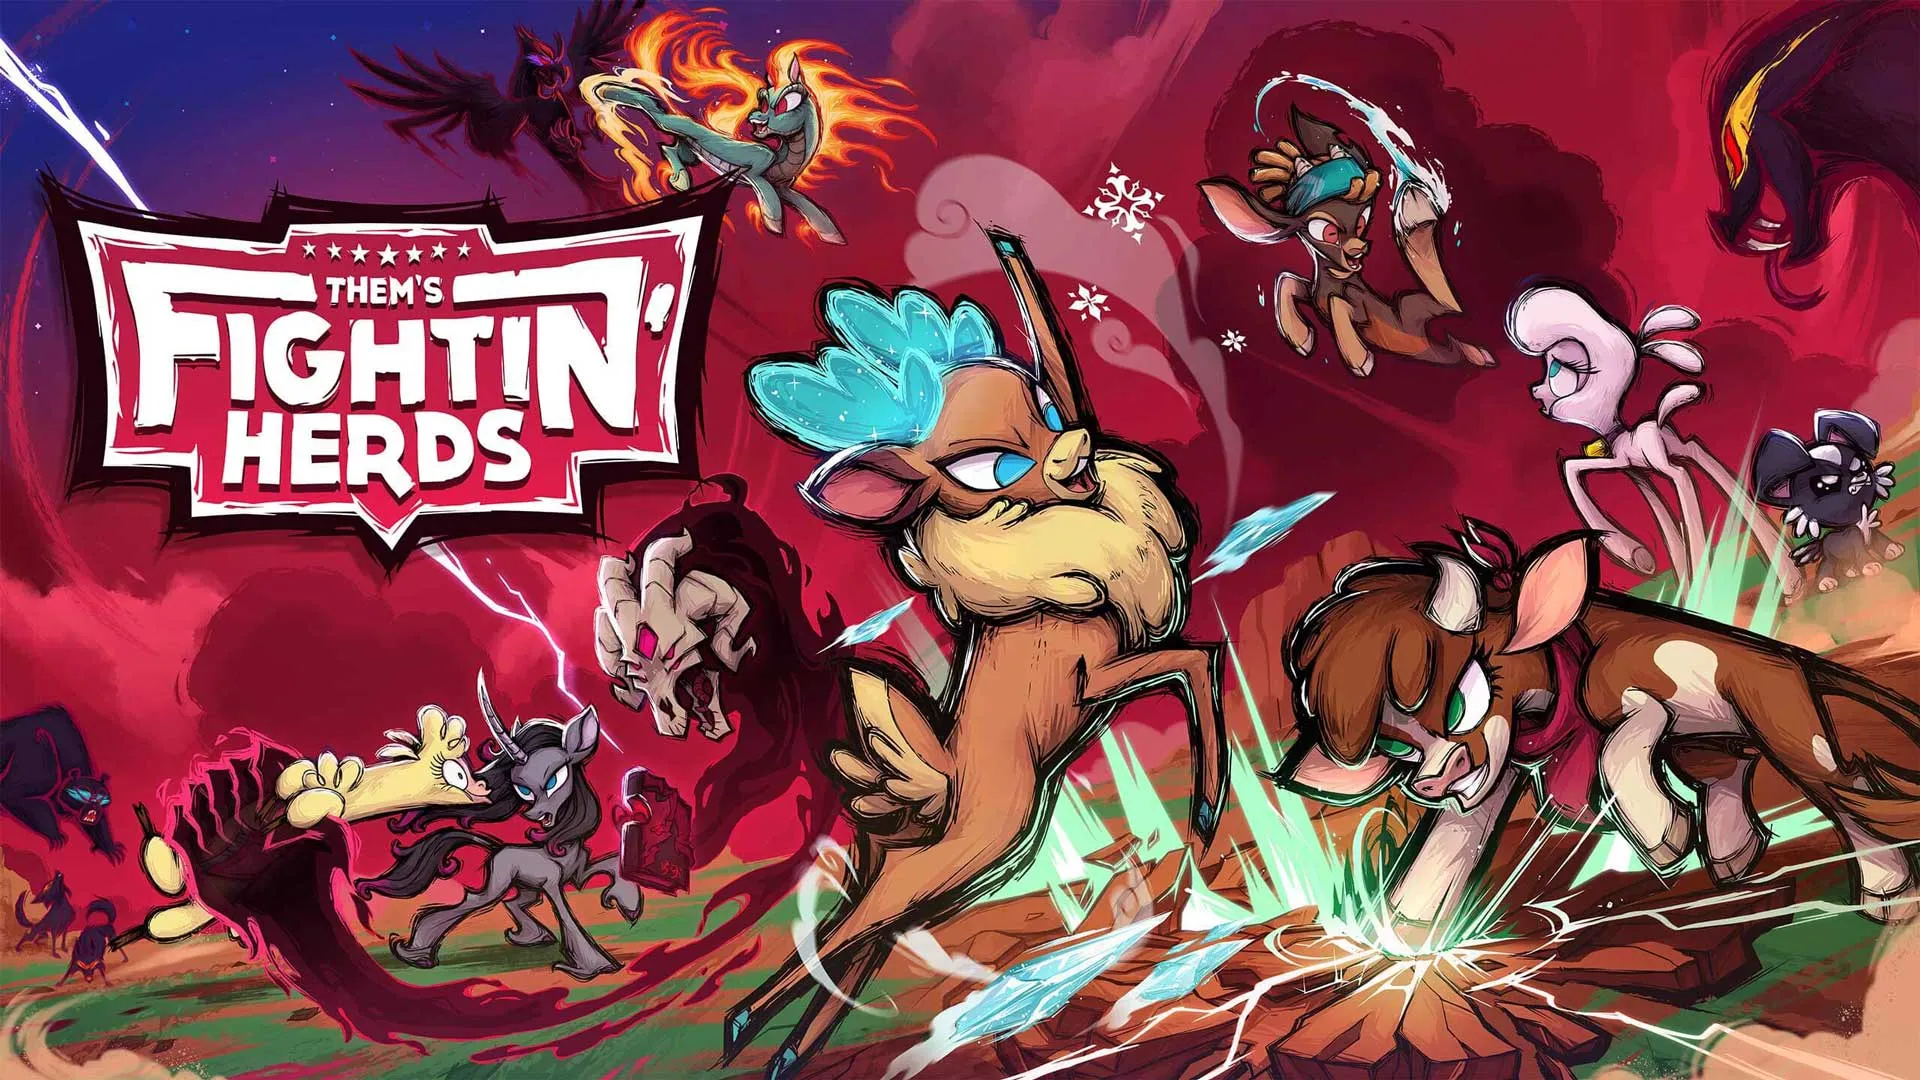 Them's Fightin' Herds free at Epic Games Store